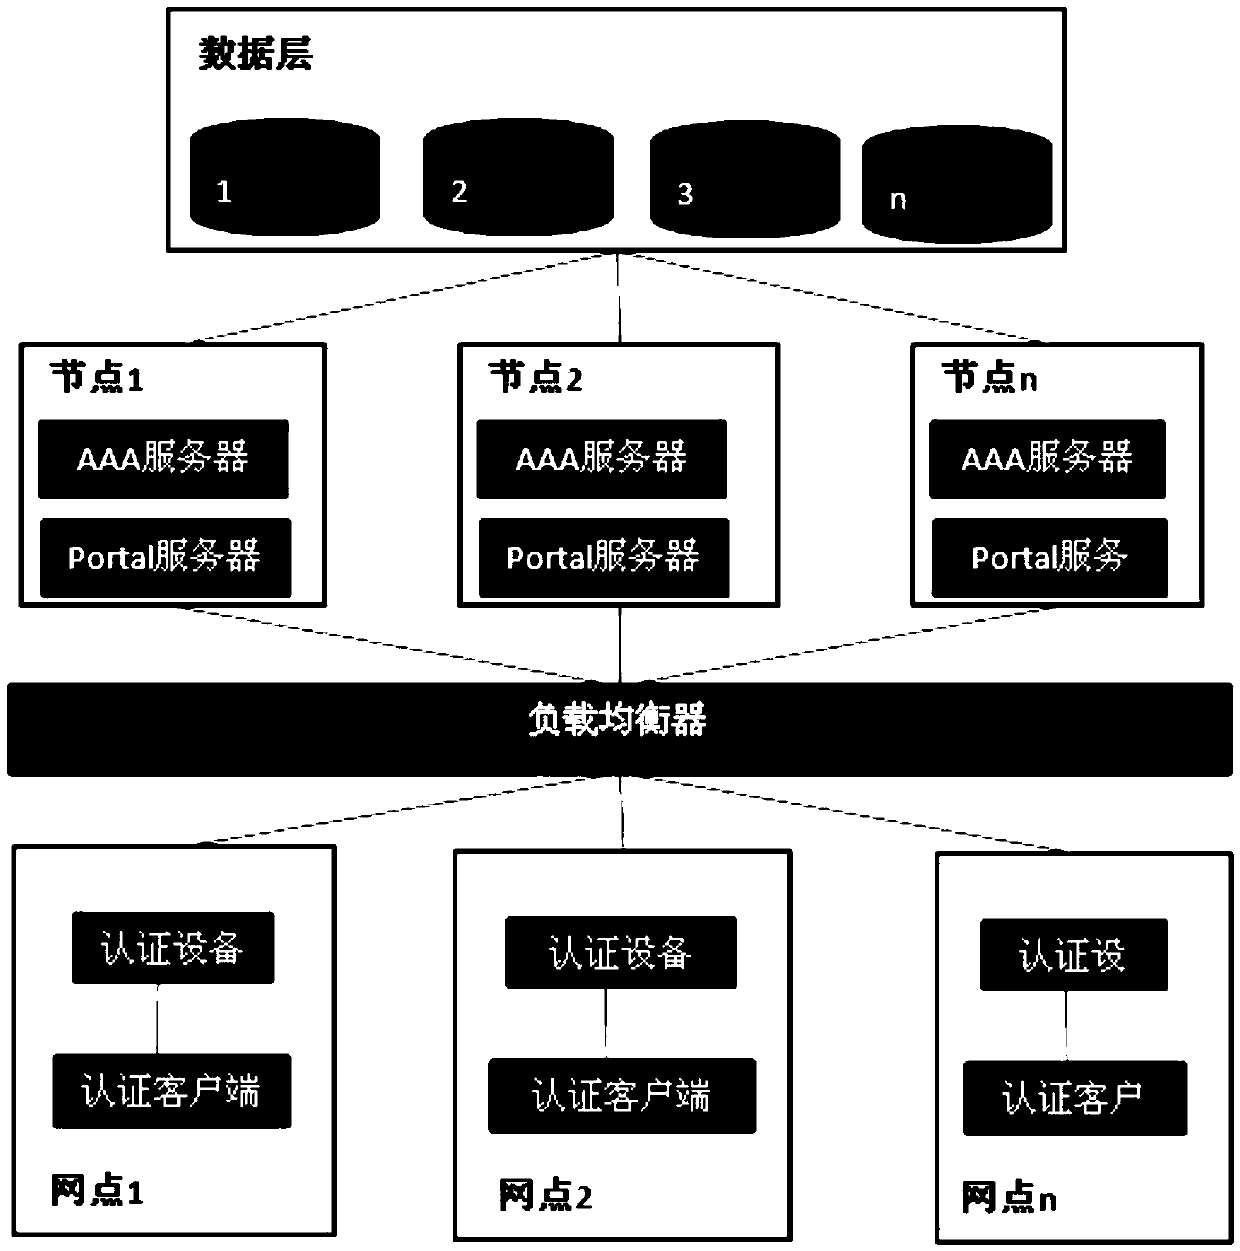 Authentication service cluster-based portal keep-alive system, method, authentication system and method